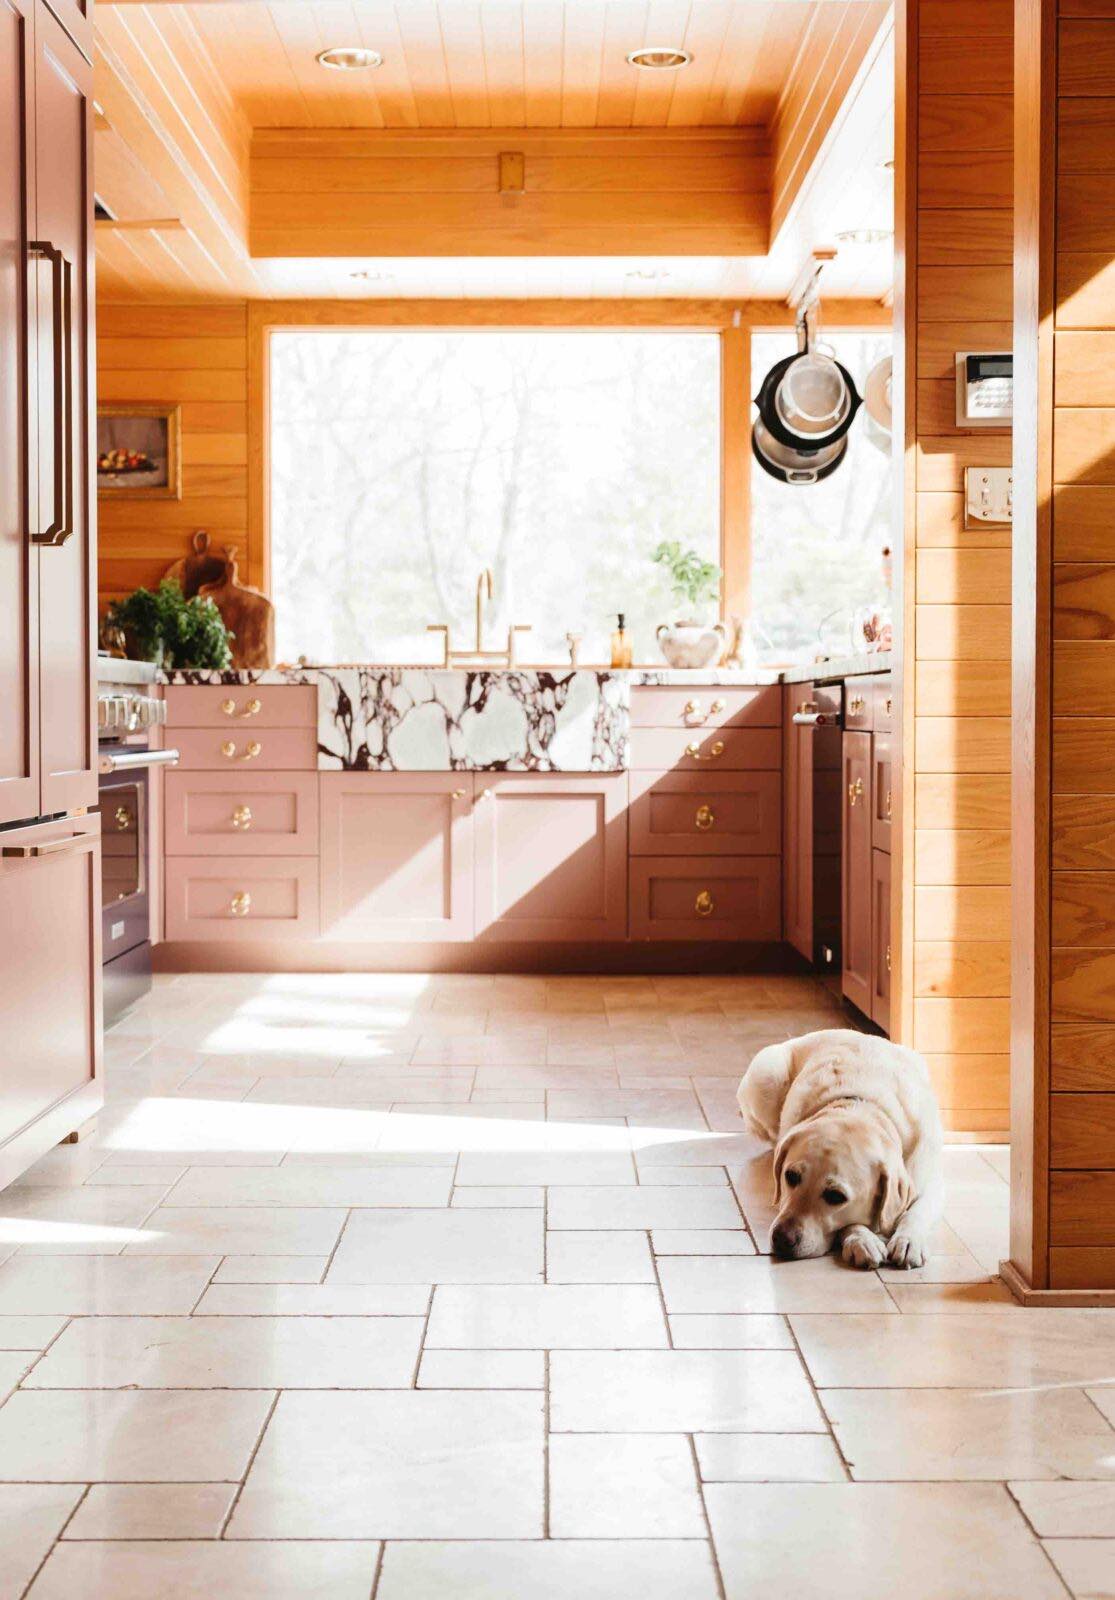 Kitchen with sun streaming in through the windows and a dog lying on the floor. The cabinets are muted pink, the flooring and countertops are marble, and the walls are covered with wood paneling.